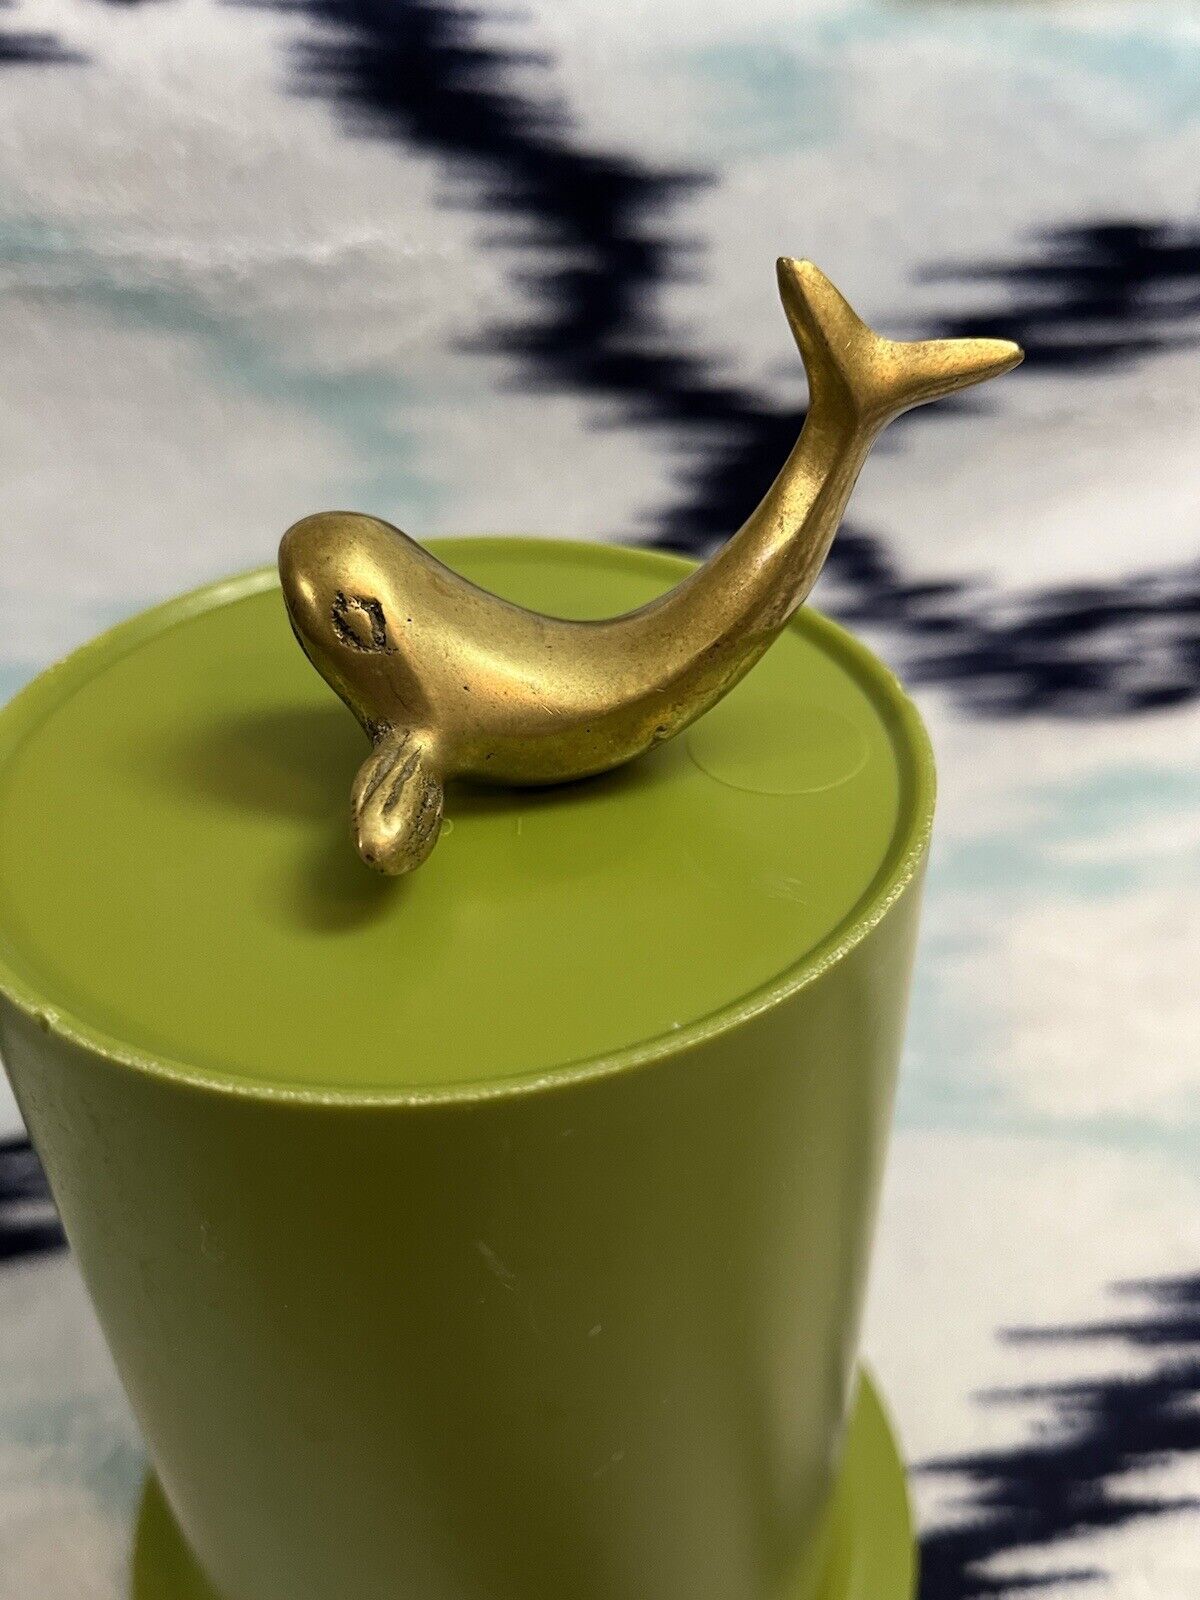 Vintage Small Solid Brass Whale Figurine Paperweight 2” Long / 2.5” Tall